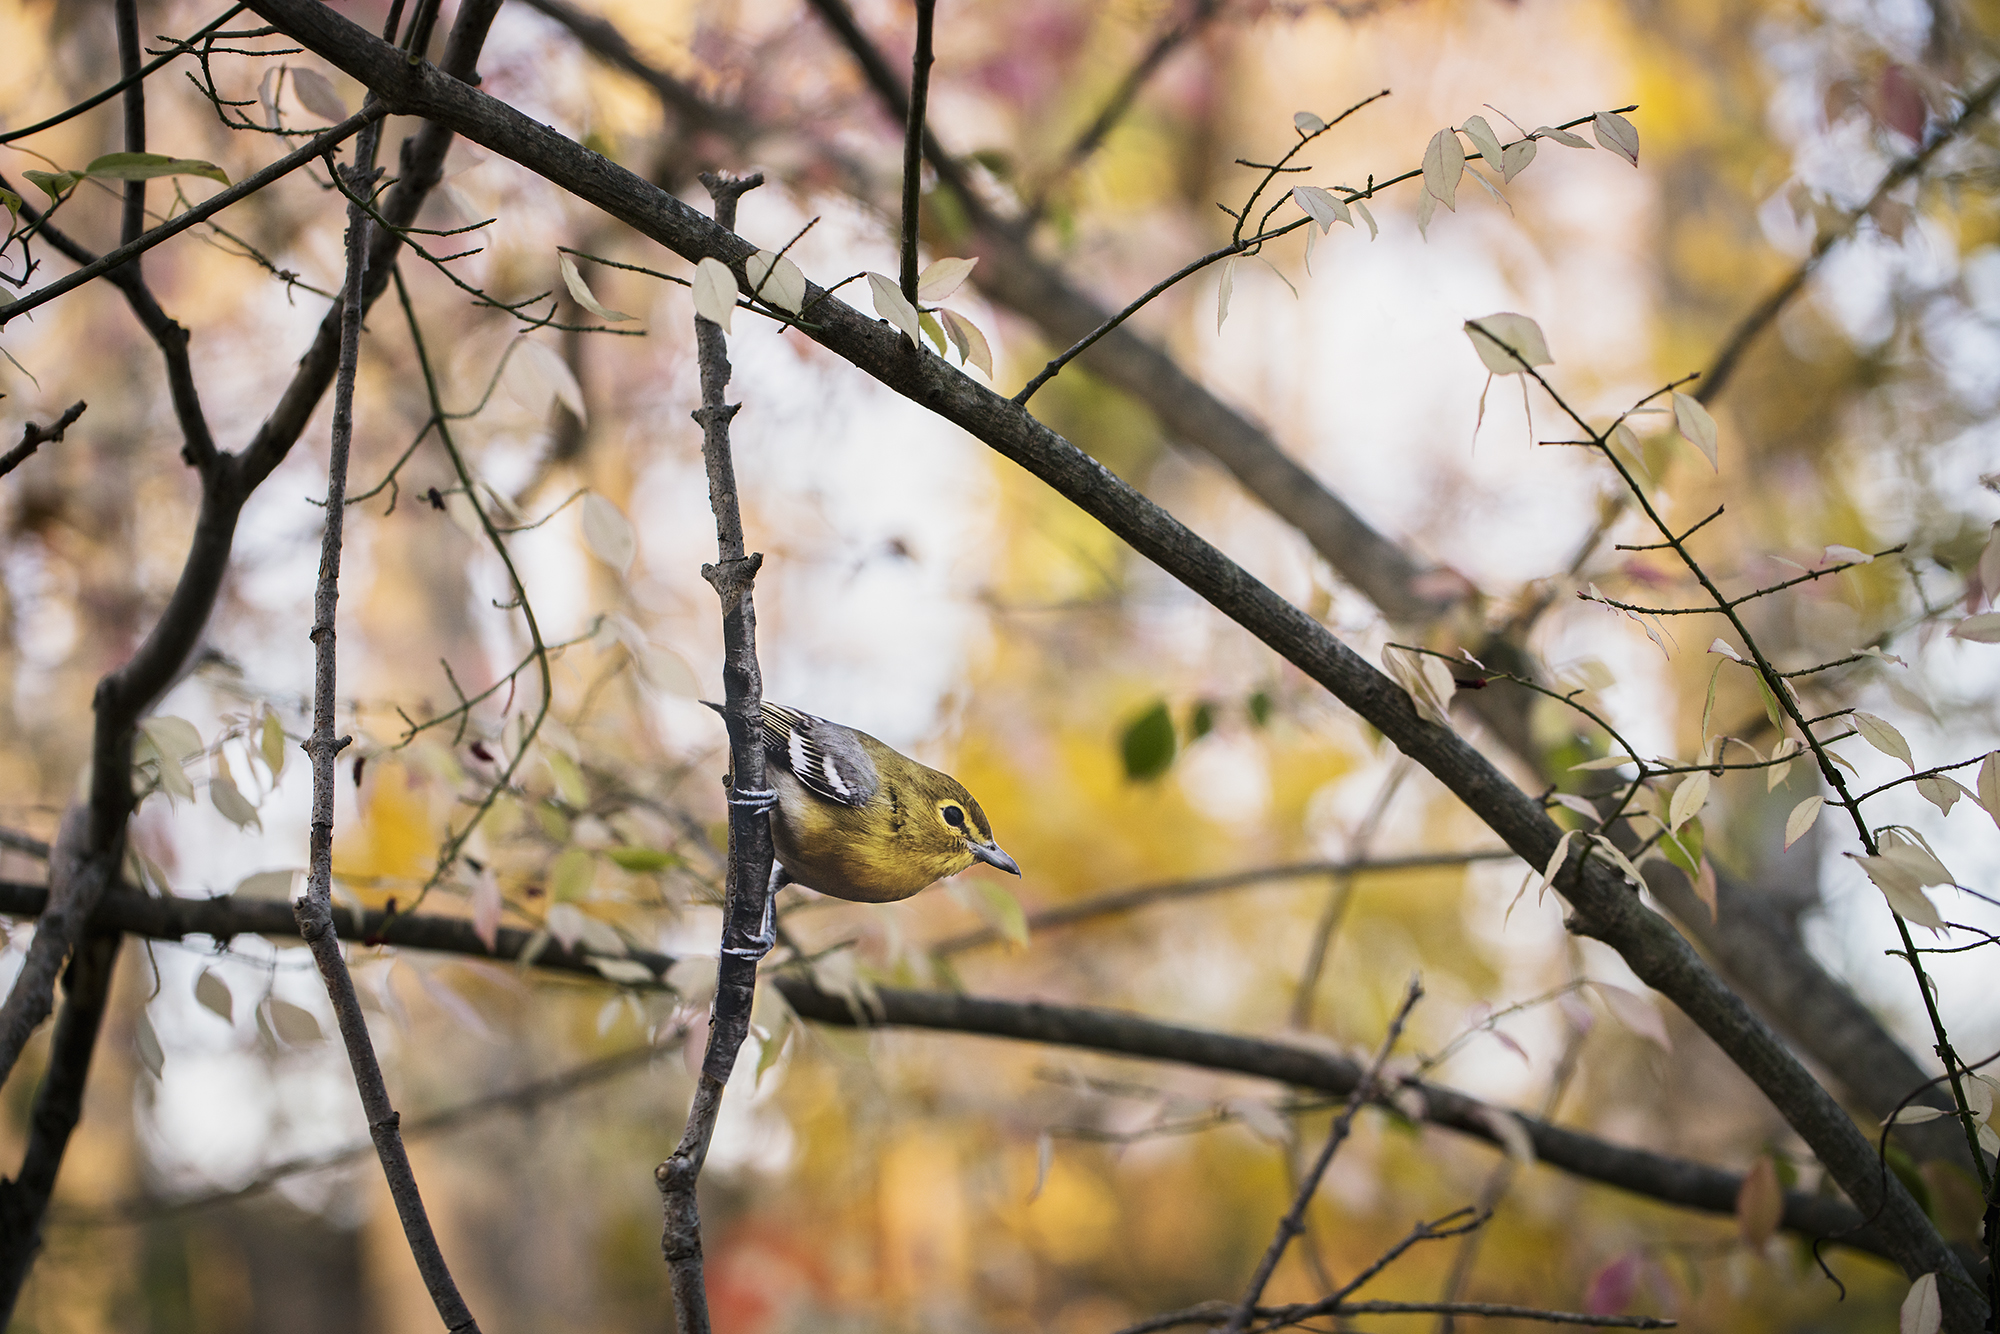 A paper cutout of a photograph of a Yellow-throated Vireo bird perched sideways on a branch in a landscape with mostly yellow autumn leaves.